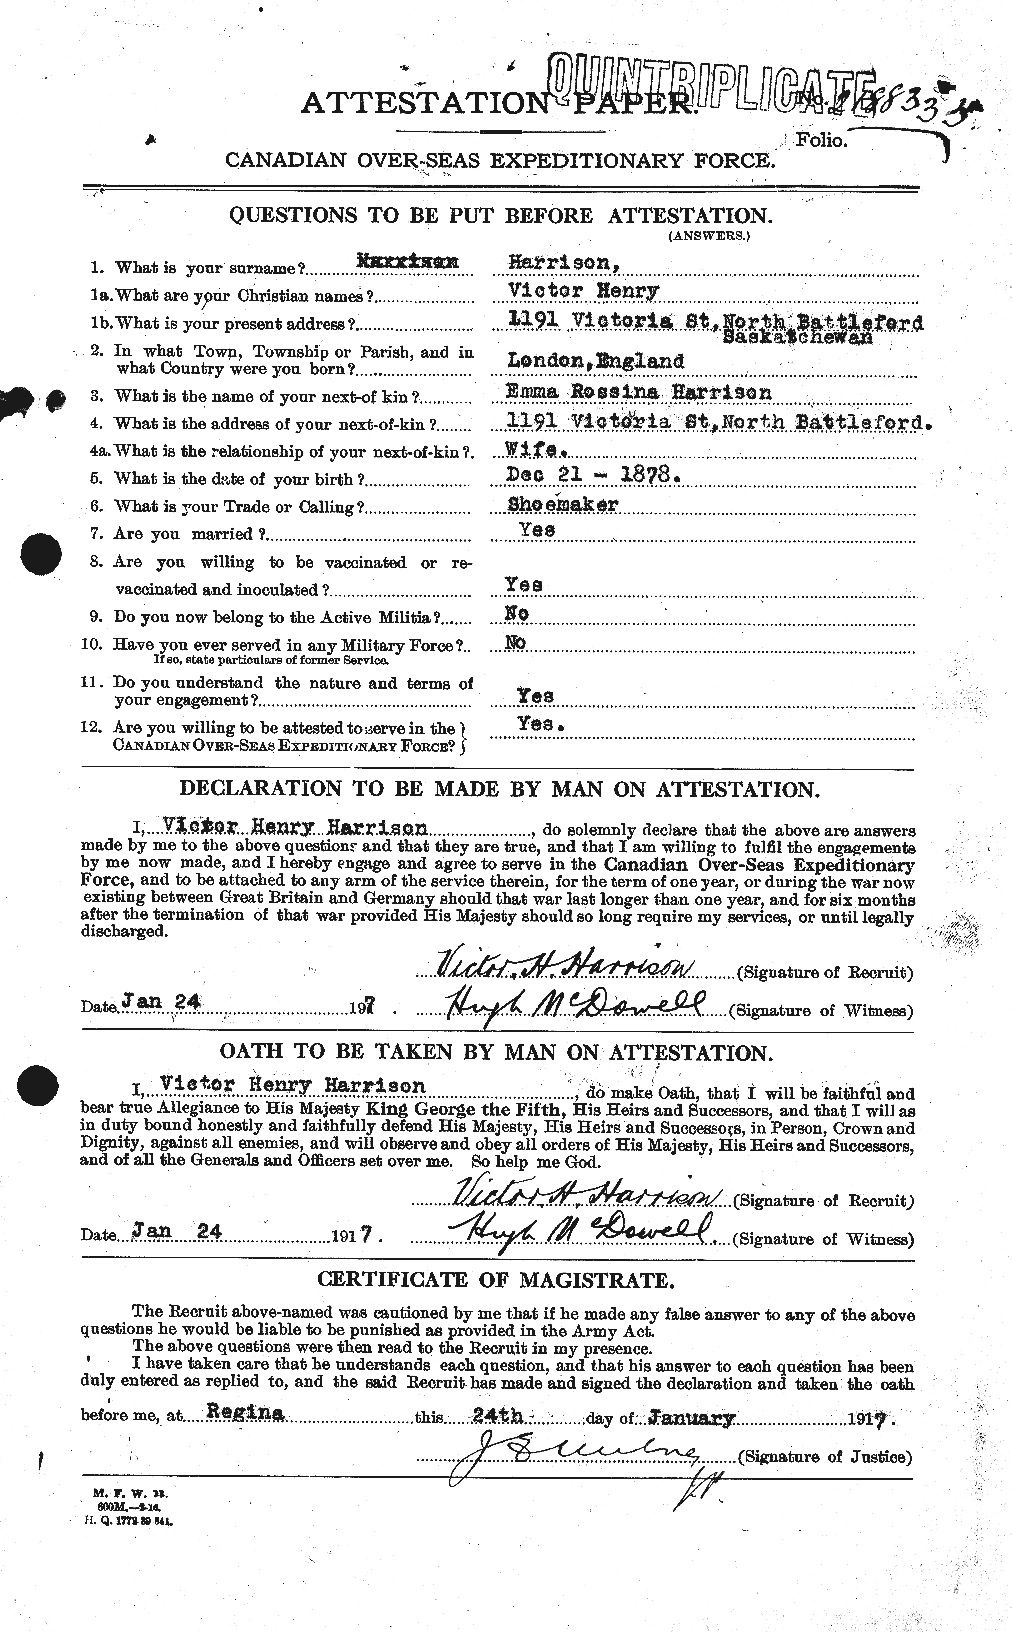 Personnel Records of the First World War - CEF 379919a